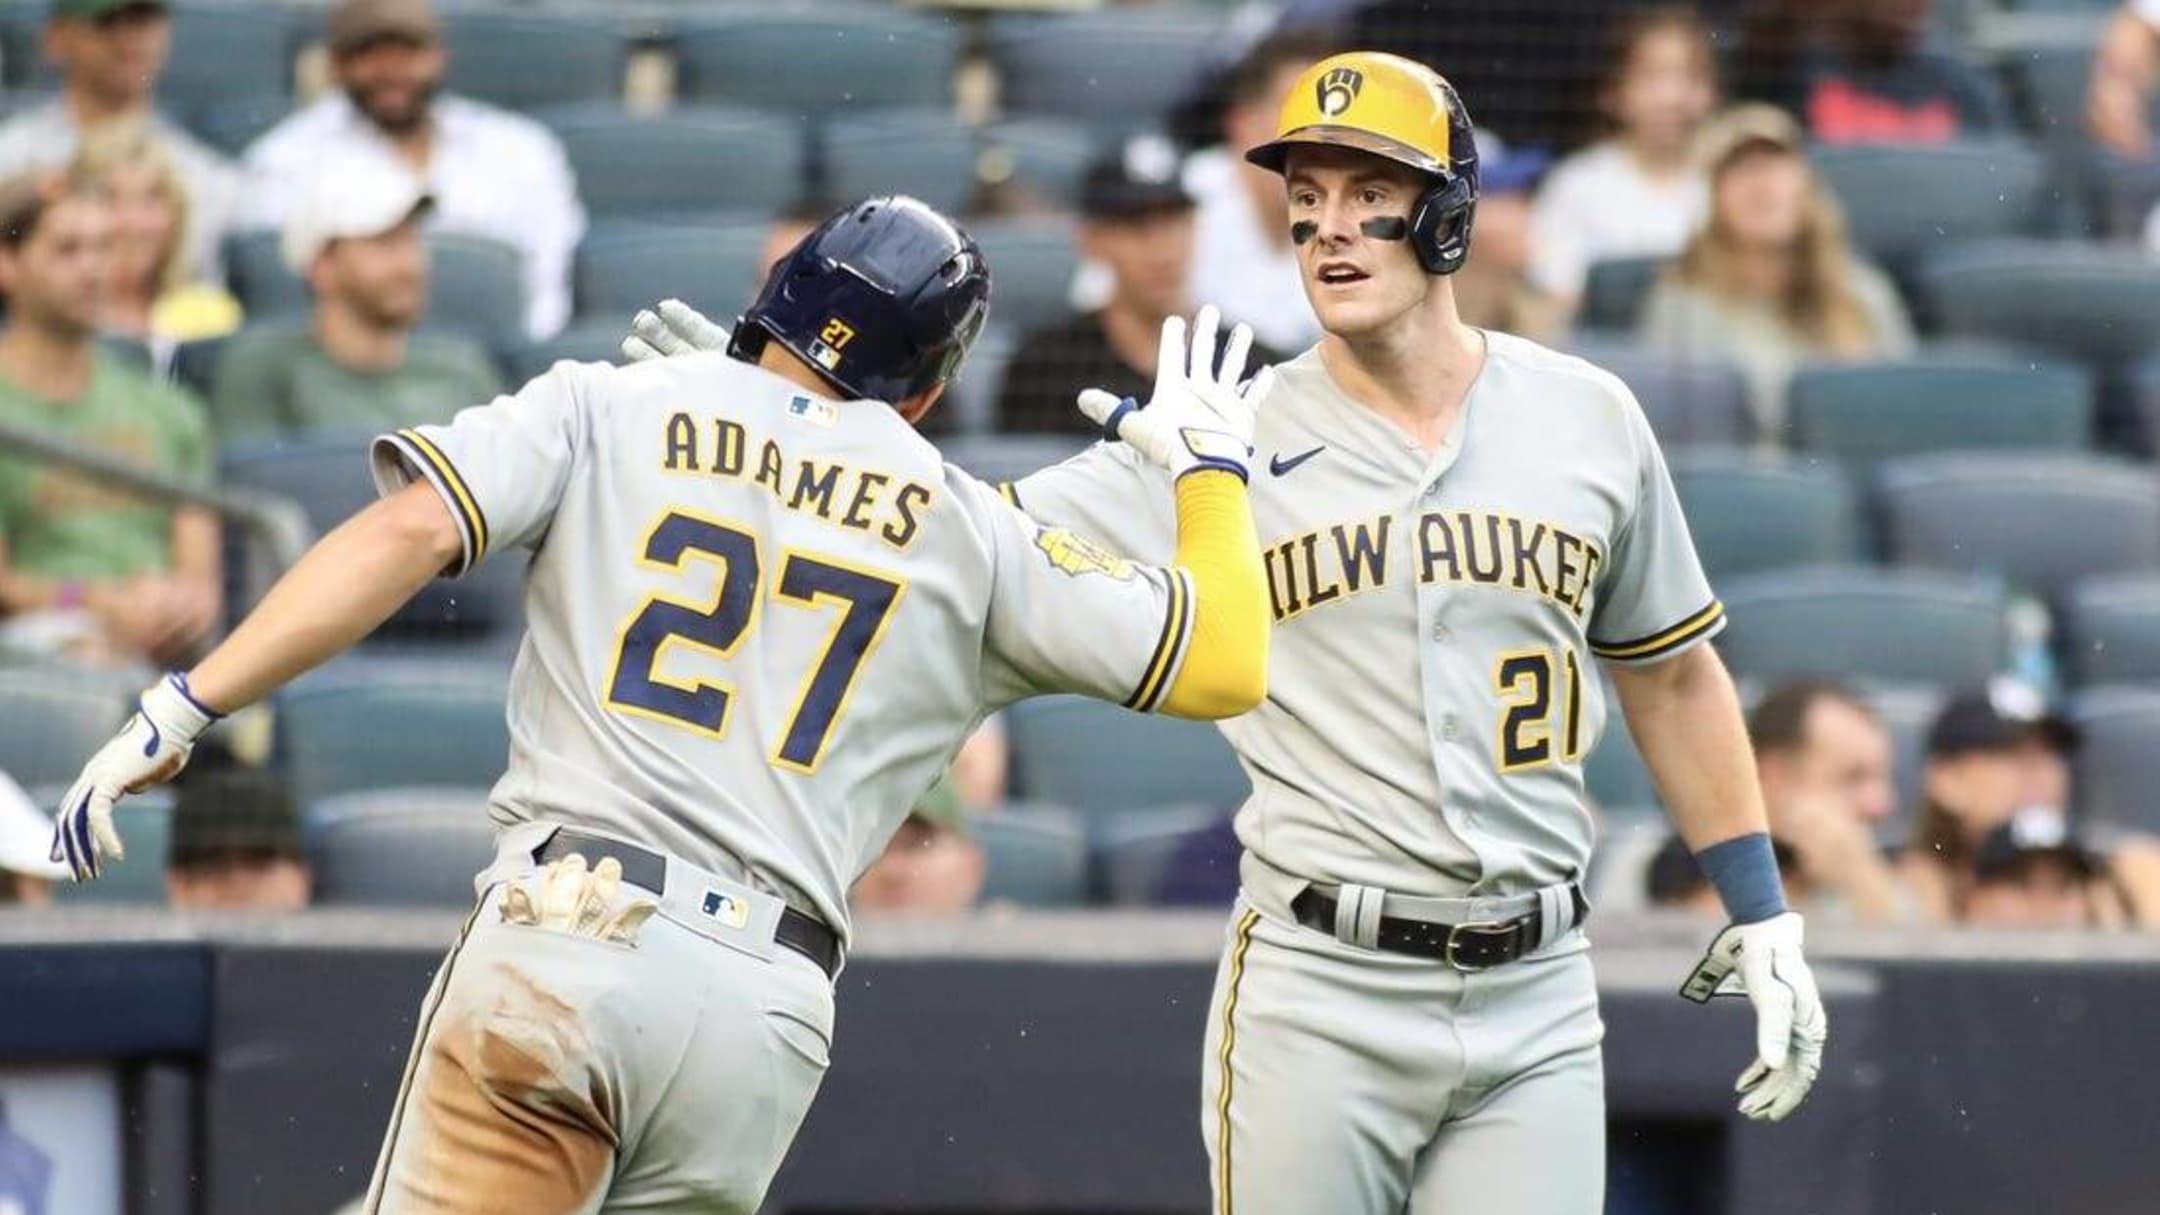 Willy Adames hits 2 homers, accounts for 7 RBIs as Brewers beat